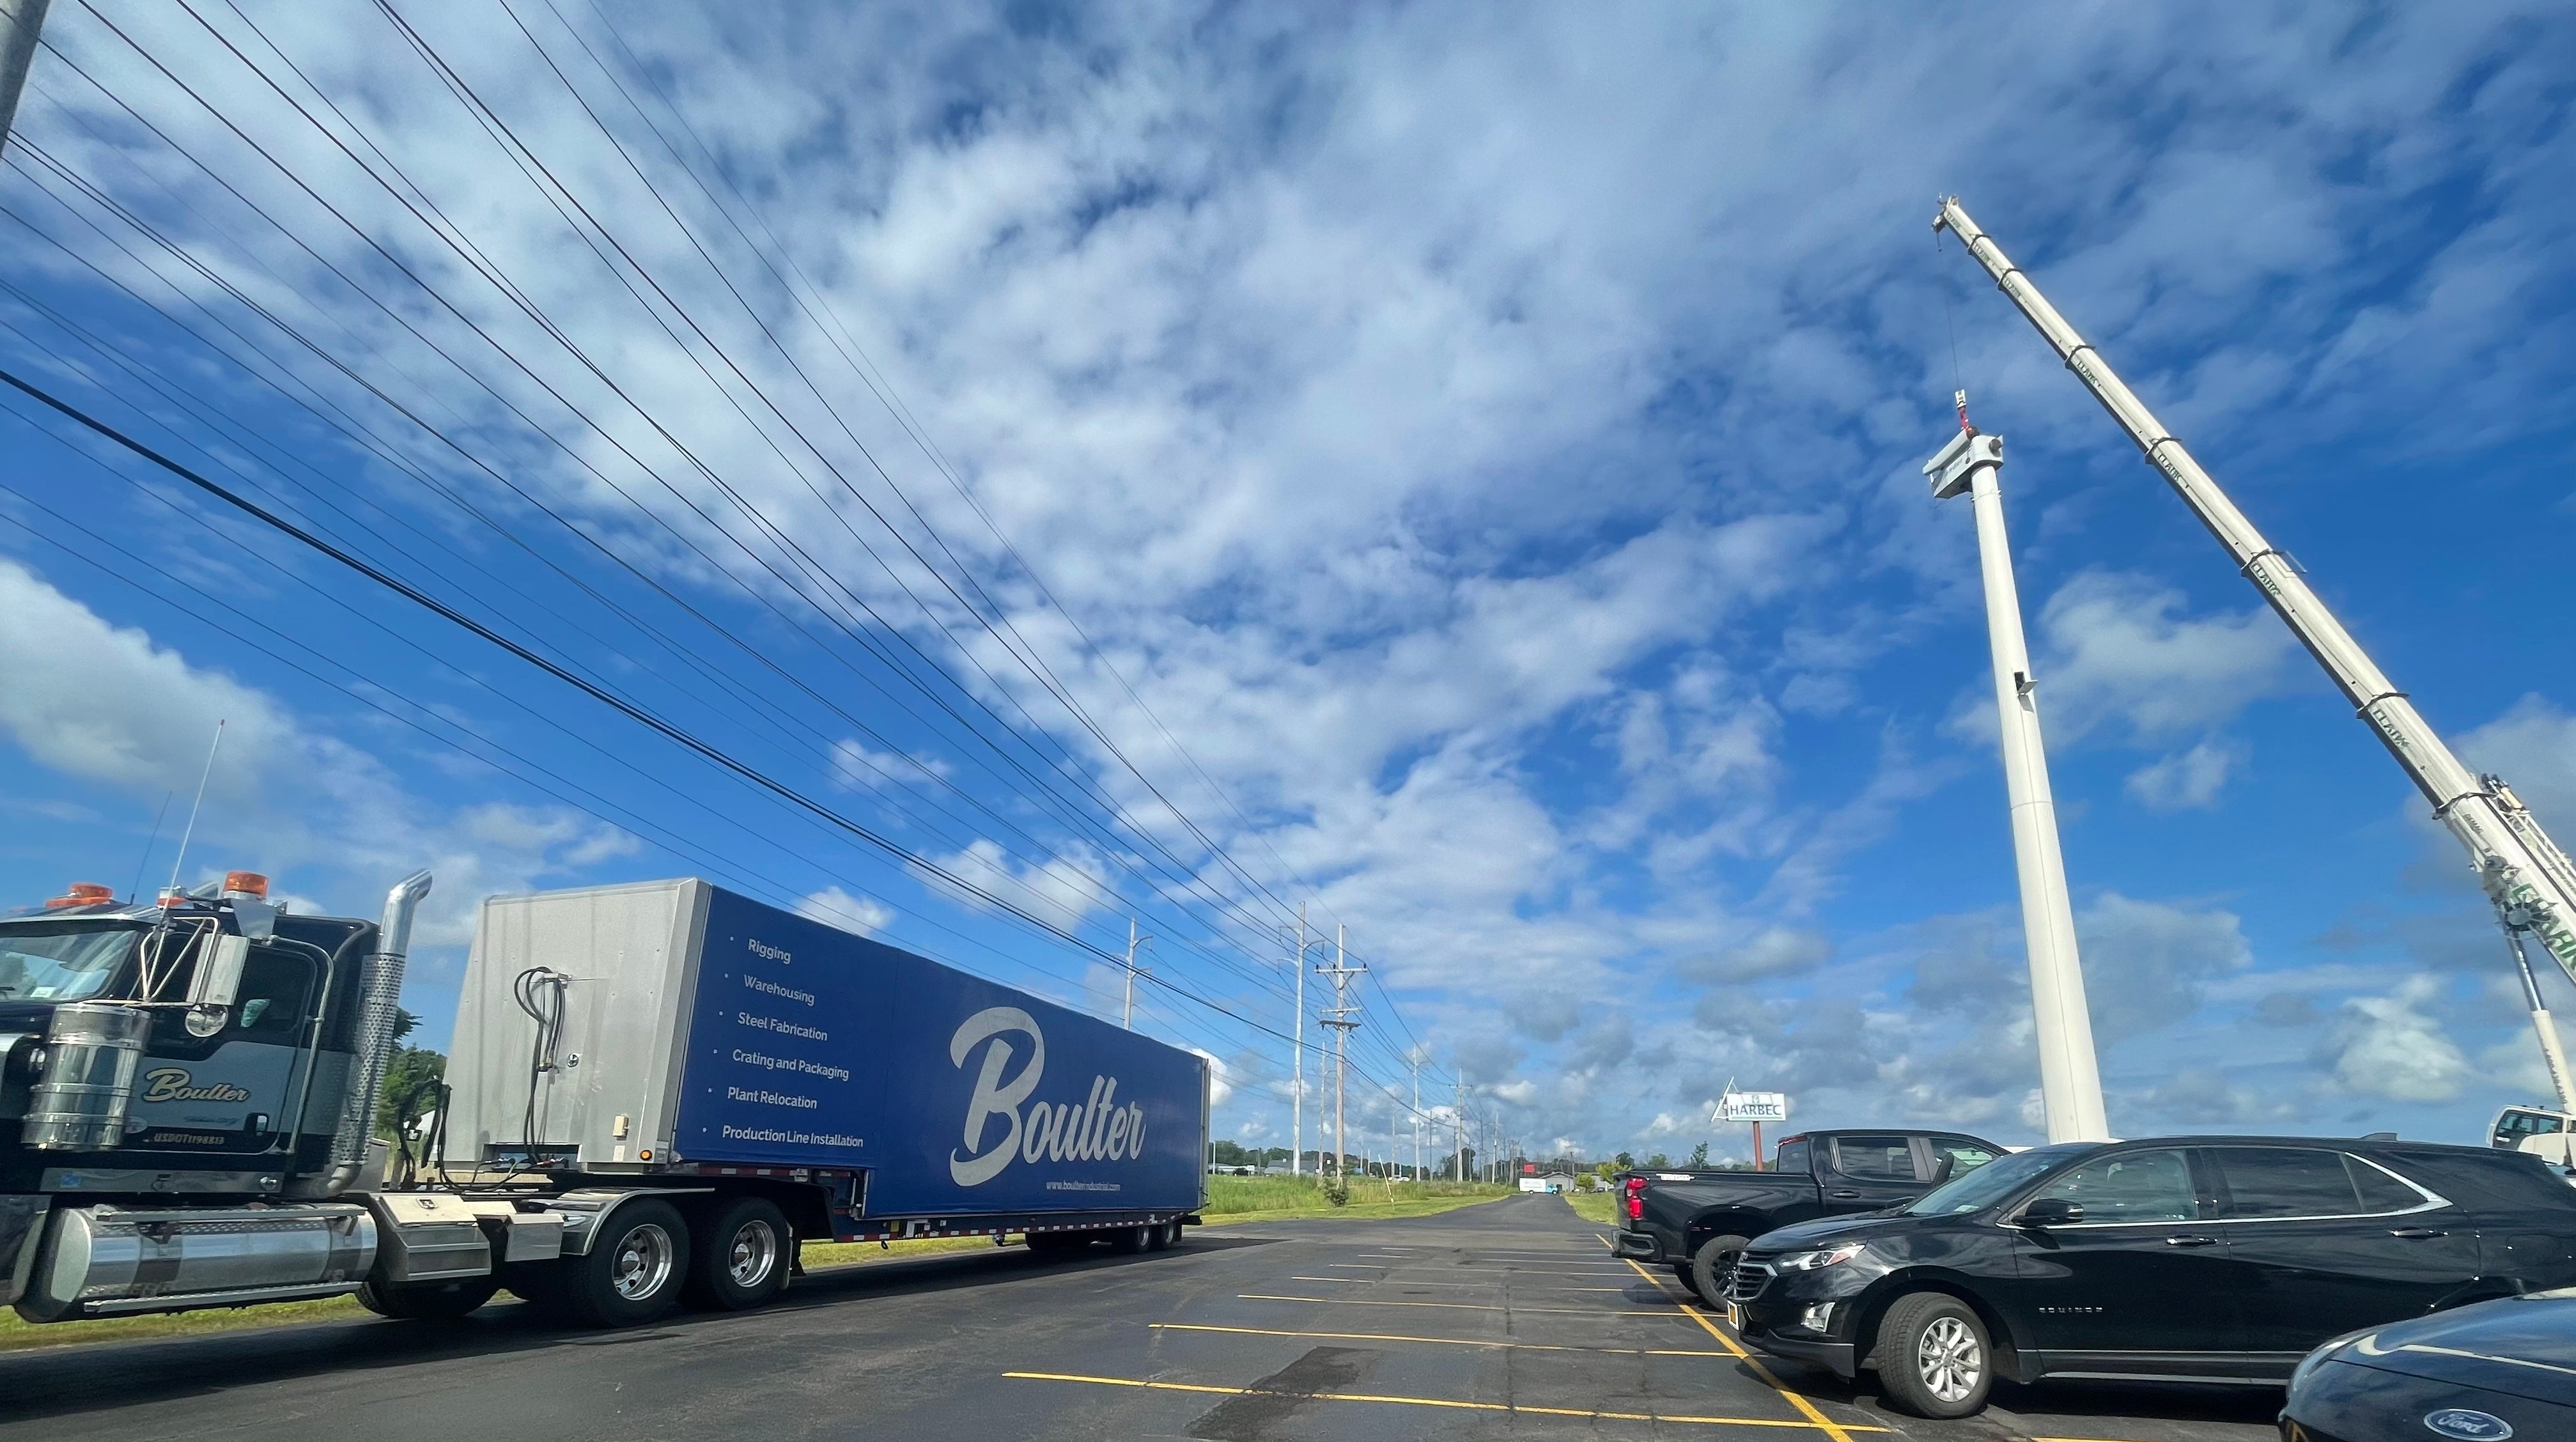 Boulter tractor trailer sitting next to Harbec wind turbine